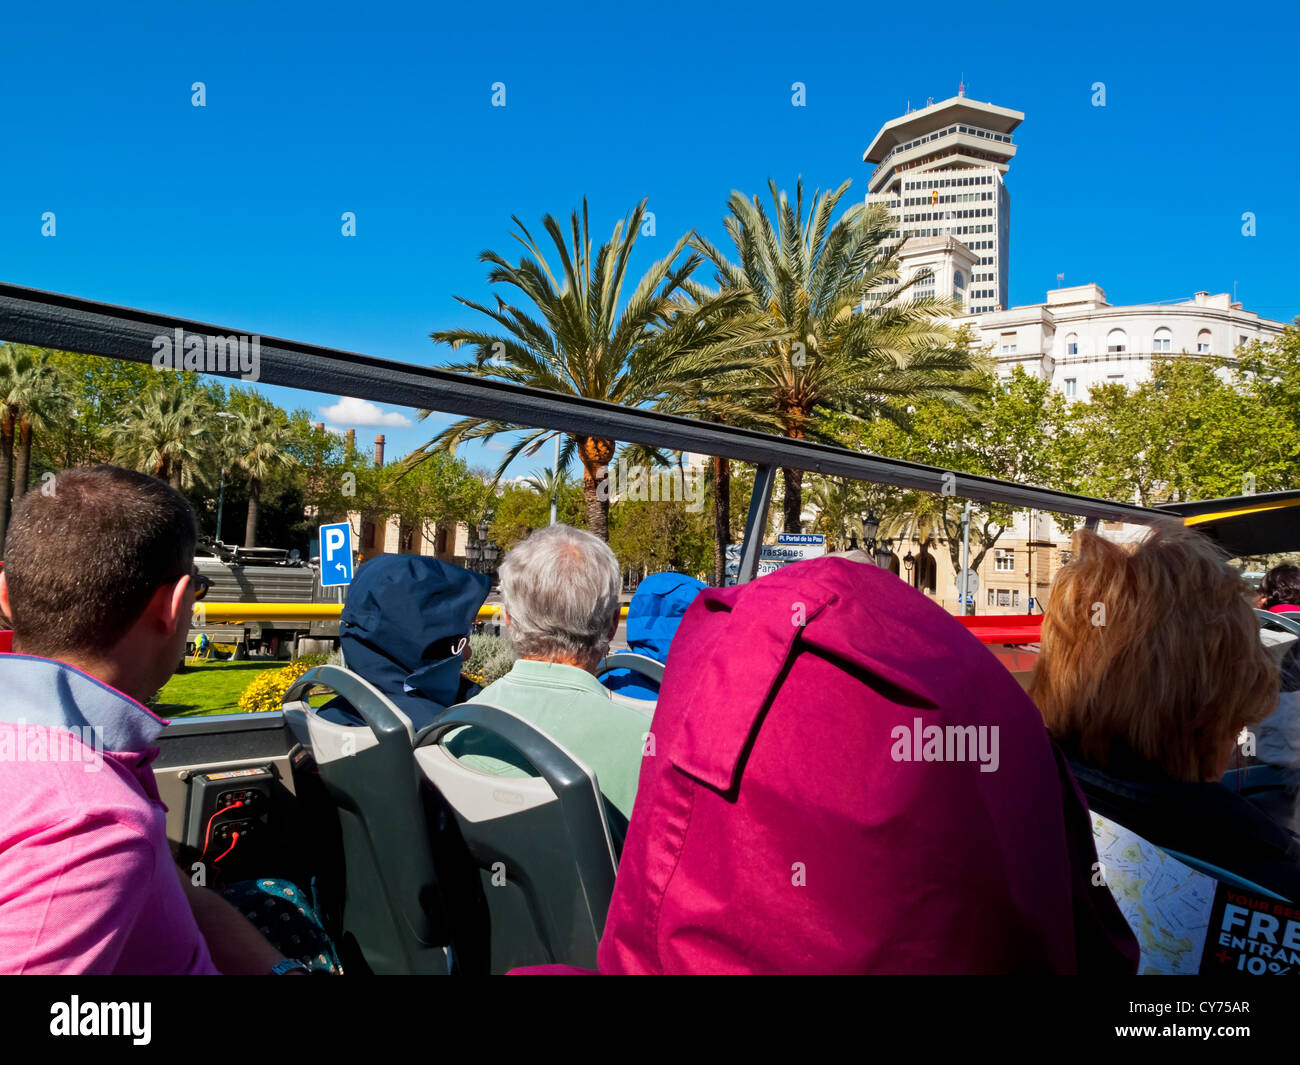 Open top tourist bus used to transport visitors around the city centre in Barcelona Spain Stock Photo